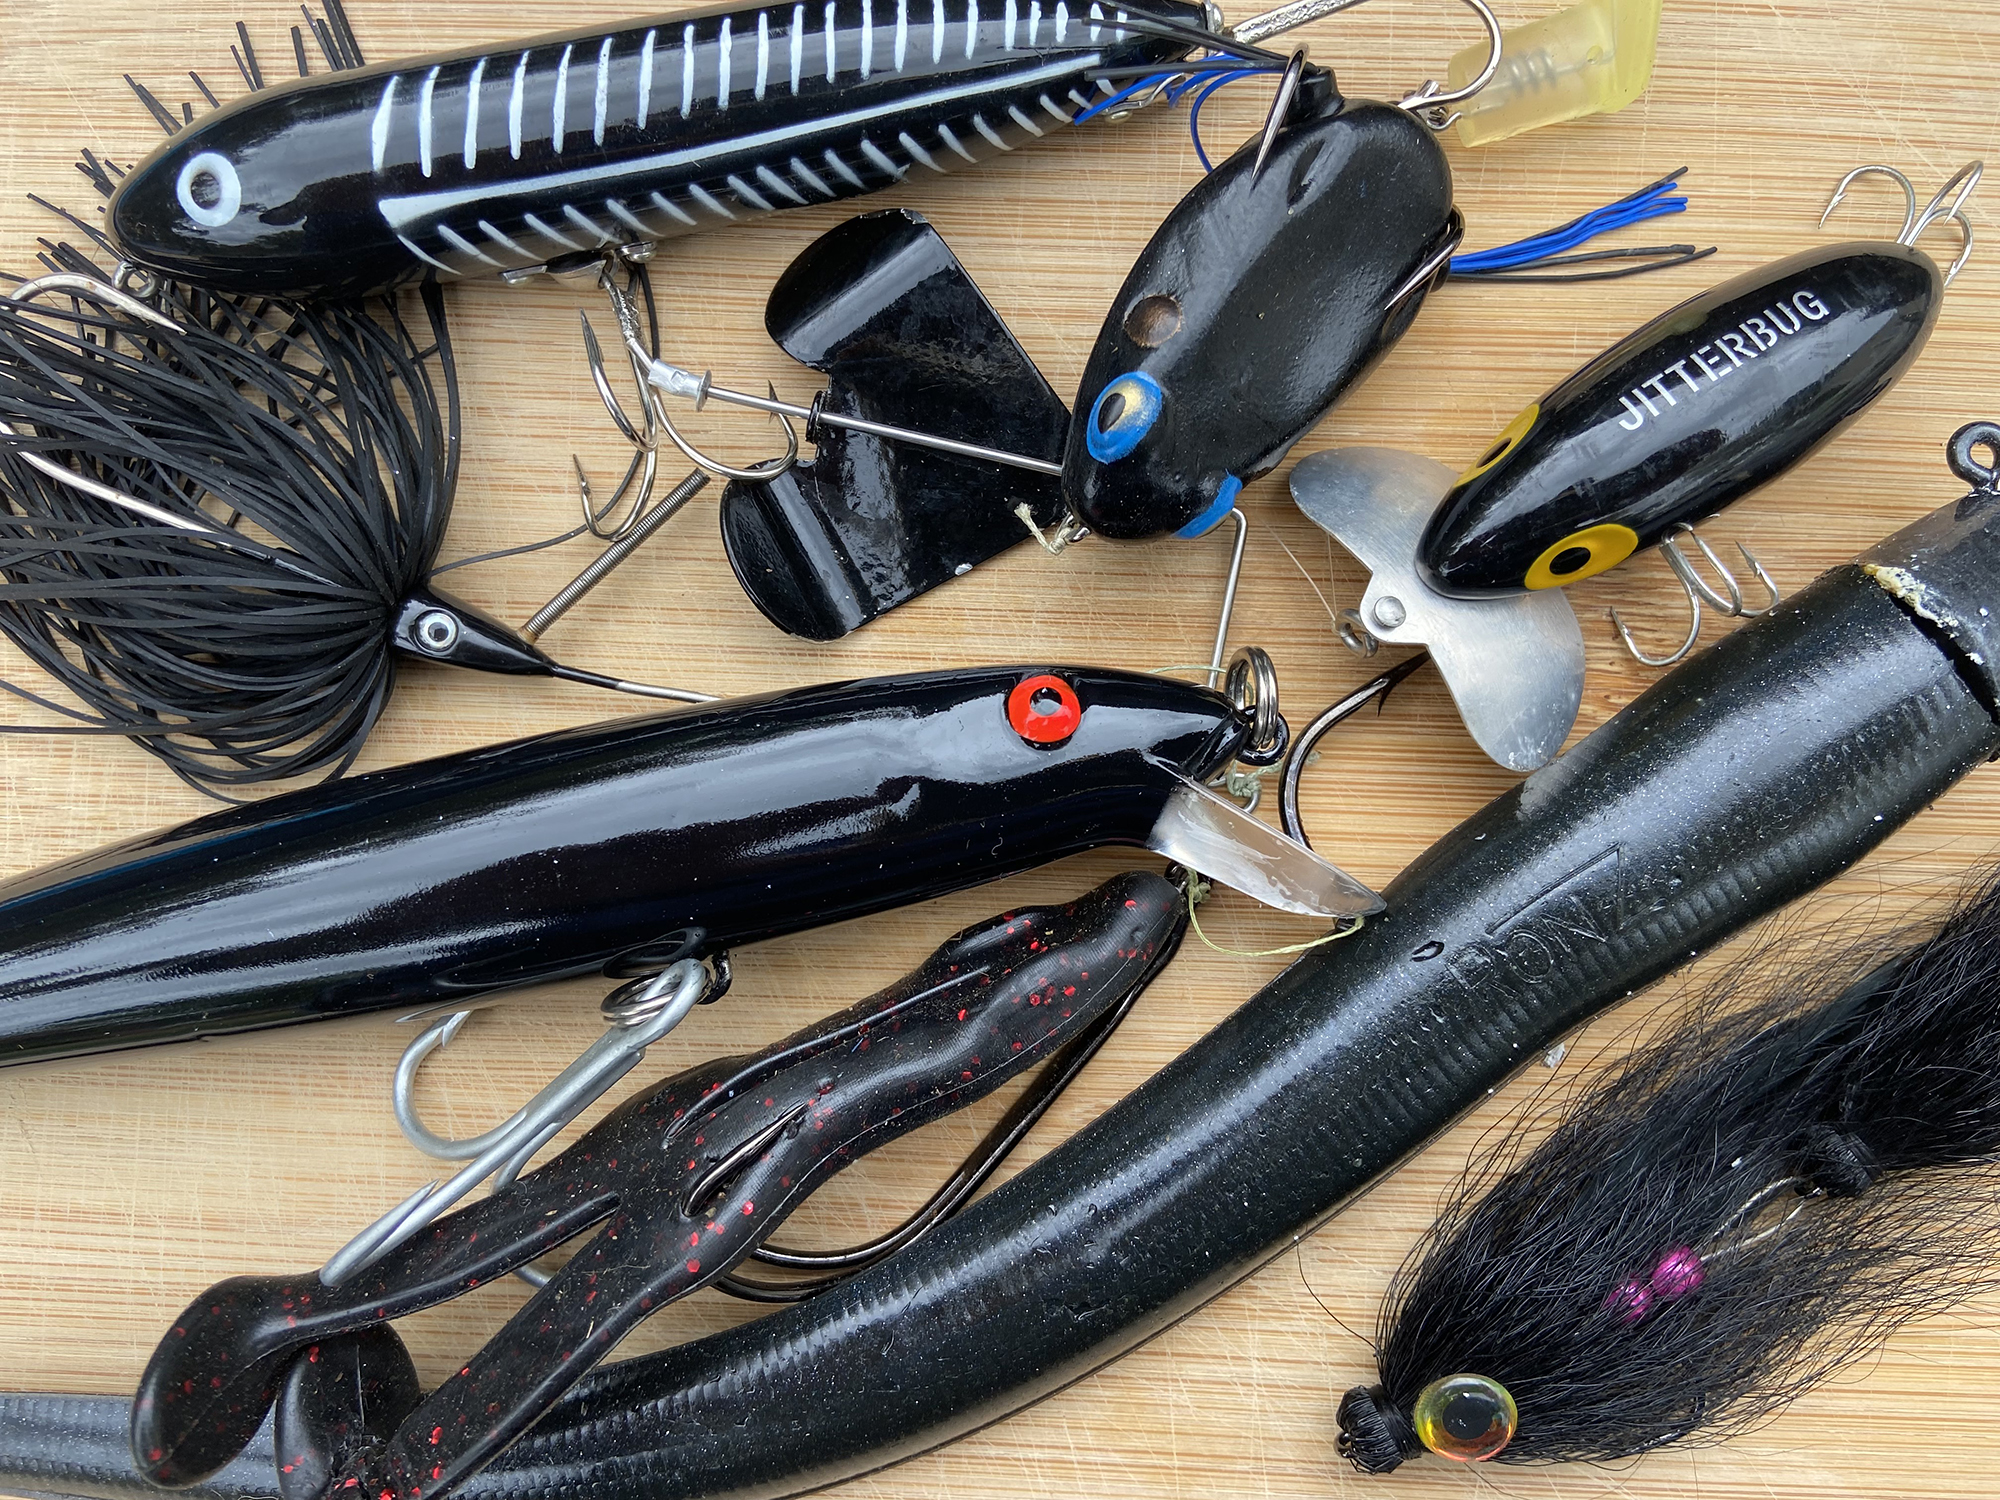 H2O Tackle  Makers of innovative fishing lures geared toward